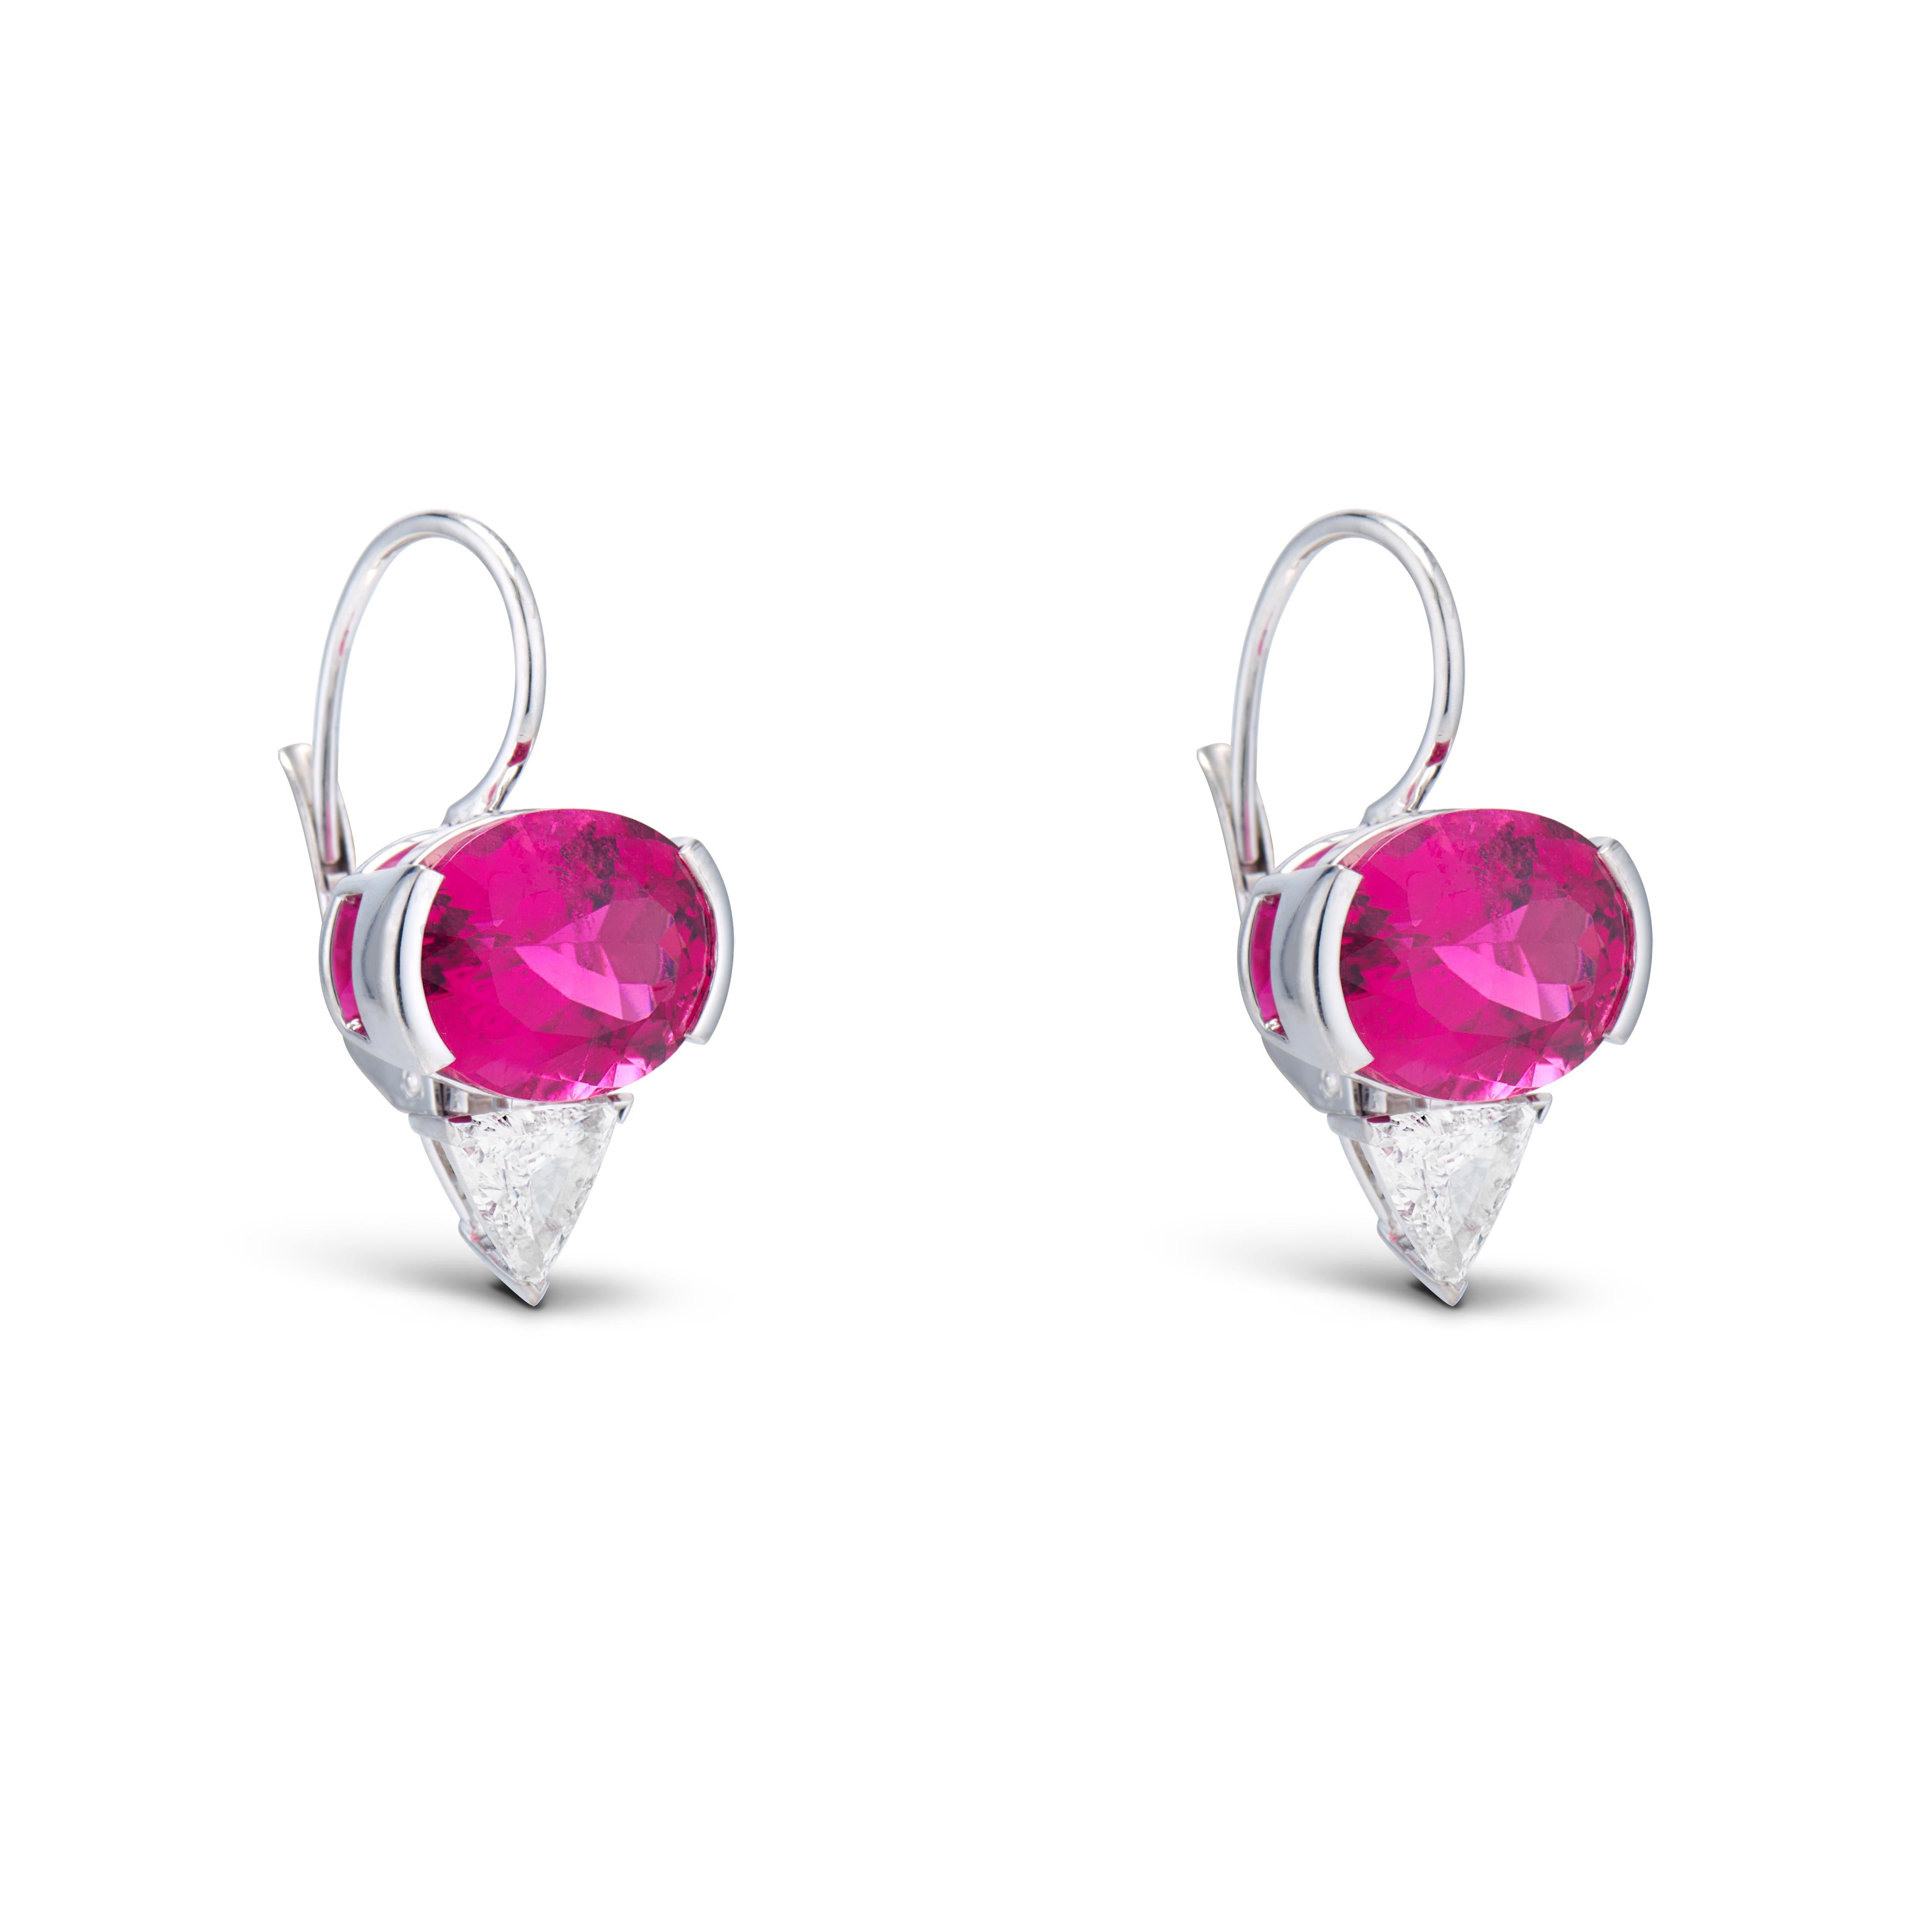 From the Passion & Strength collection, the Victoria Earrings are set with oval-shaped rubellite tourmalines total weighing 11.65 carats paired with striking, 1.22 carats E VS angular trillion-cut diamonds.
Handcrafted in 18k white gold.
The earring